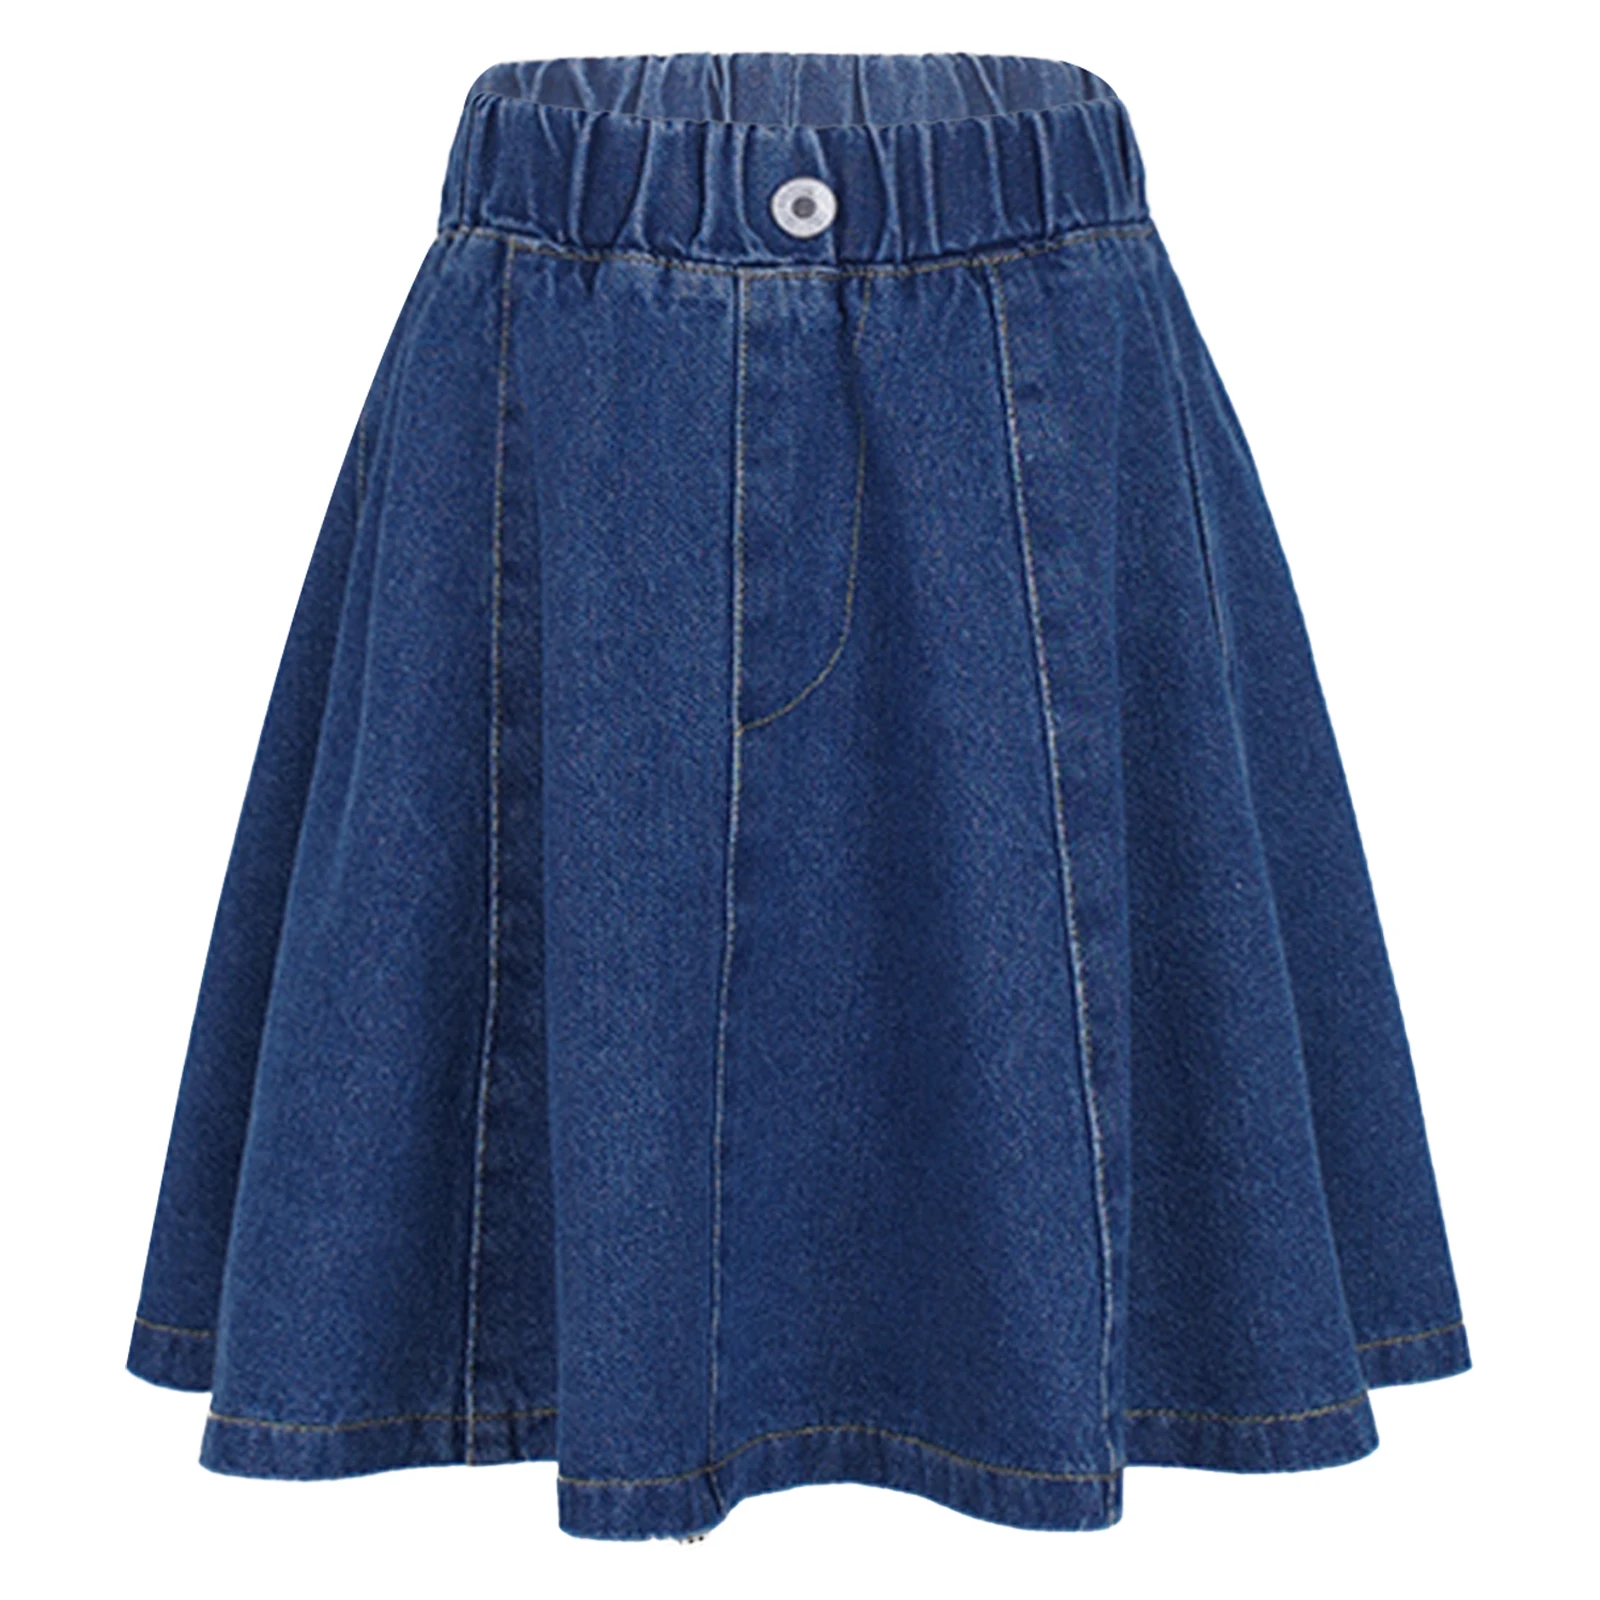 Denim Skirt Kids for Girls Summer Baby Girl Casual Clothes Blue Lolita School Cute Skirts 3 4 5 6 7 8 9 10 11 12 13 14 Years Old